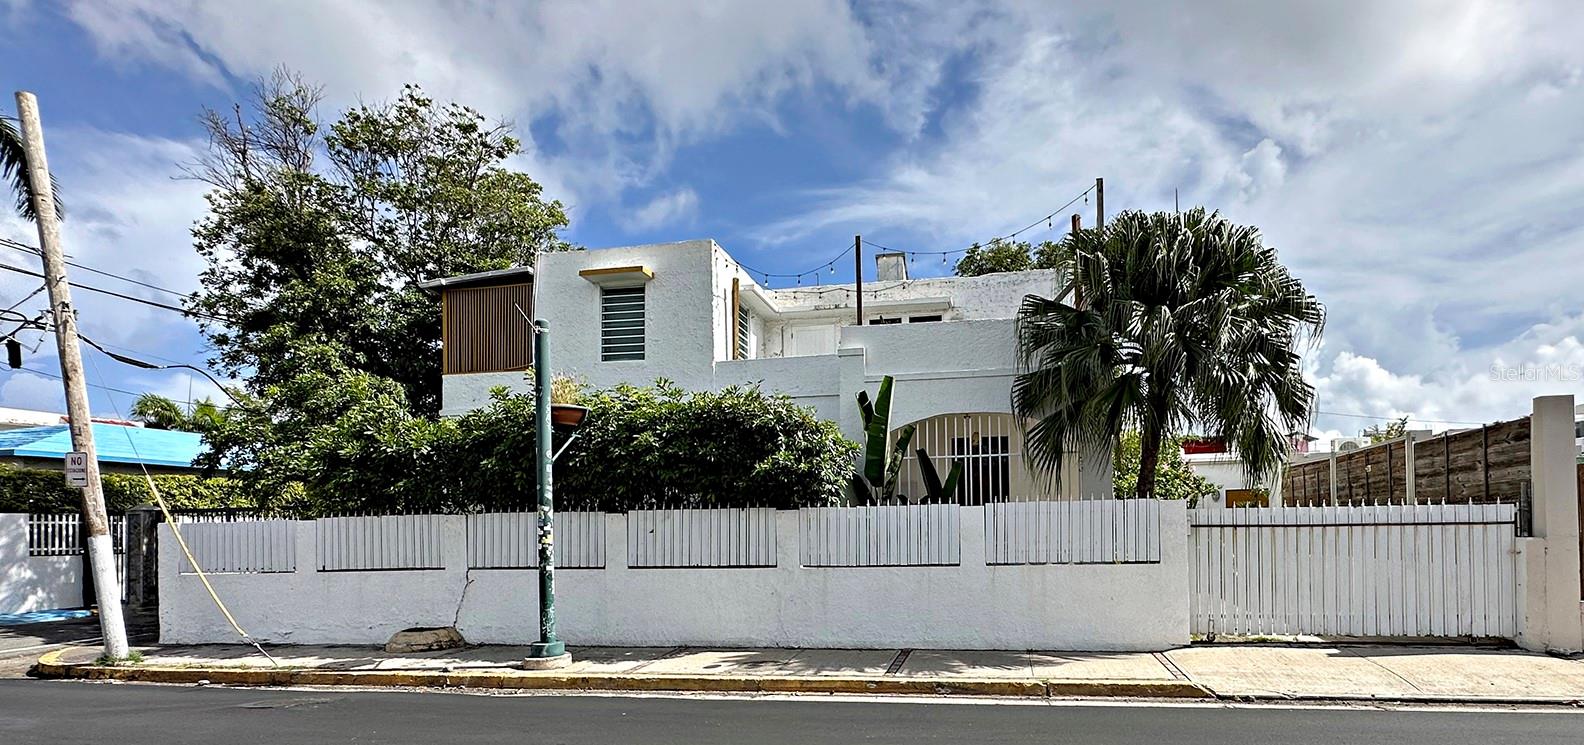 1901 MC LEARY AVE, San Juan, Puerto Rico 00911, 6 Bedrooms Bedrooms, ,3 BathroomsBathrooms,Residential,For Sale,MC LEARY AVE,PR9096391